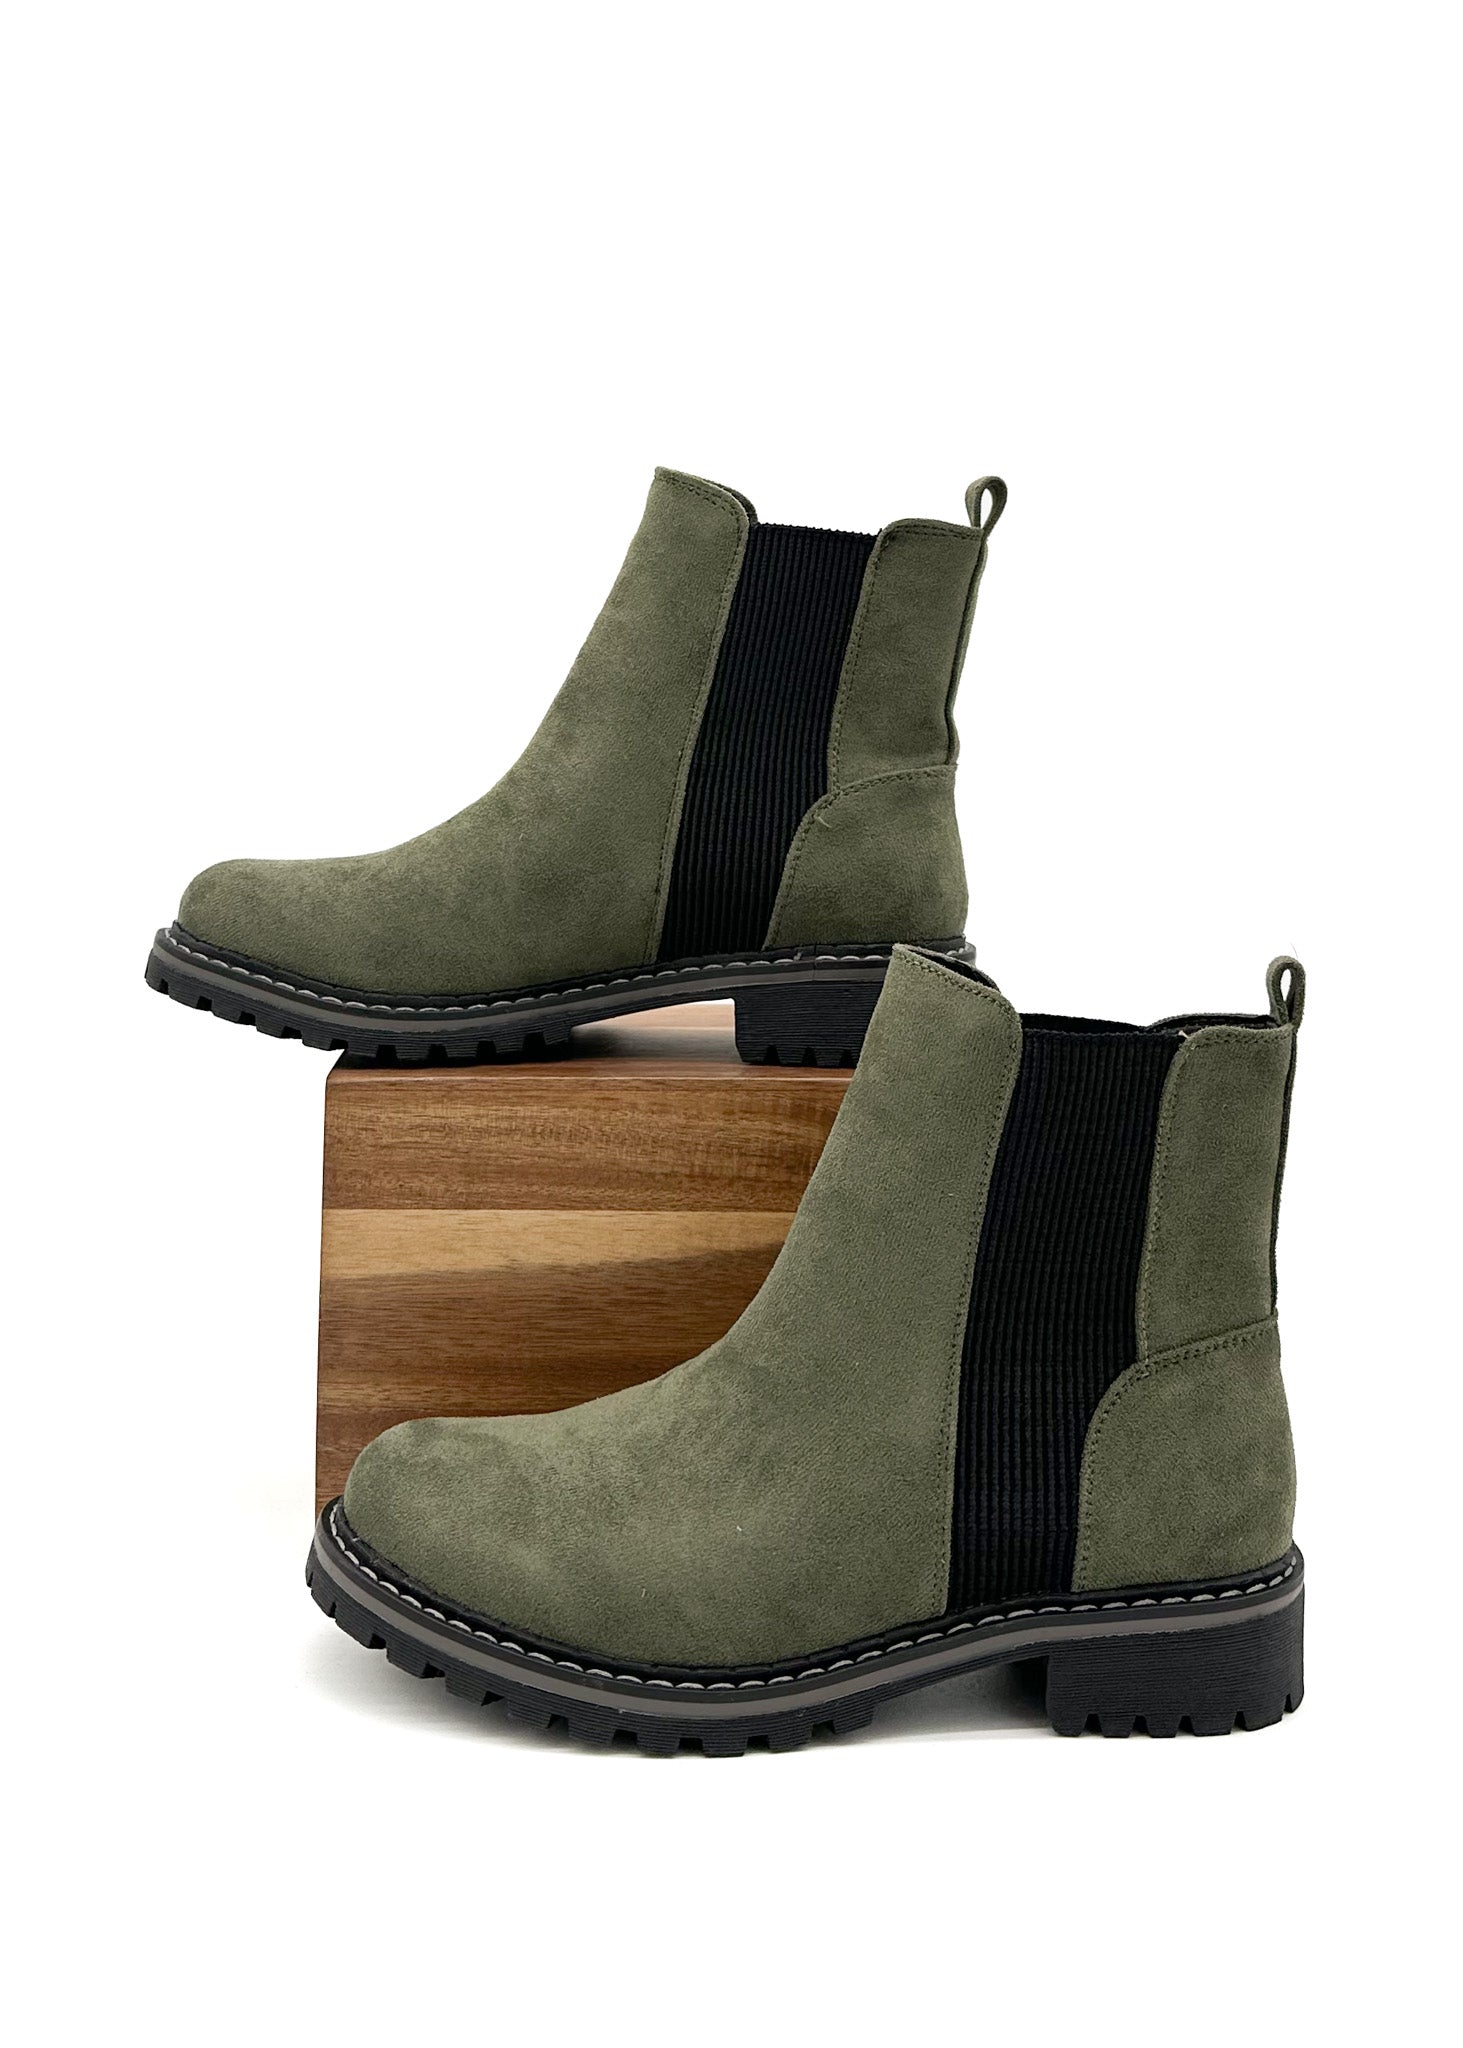 Howl Ankle Boots in Dark Green Suede